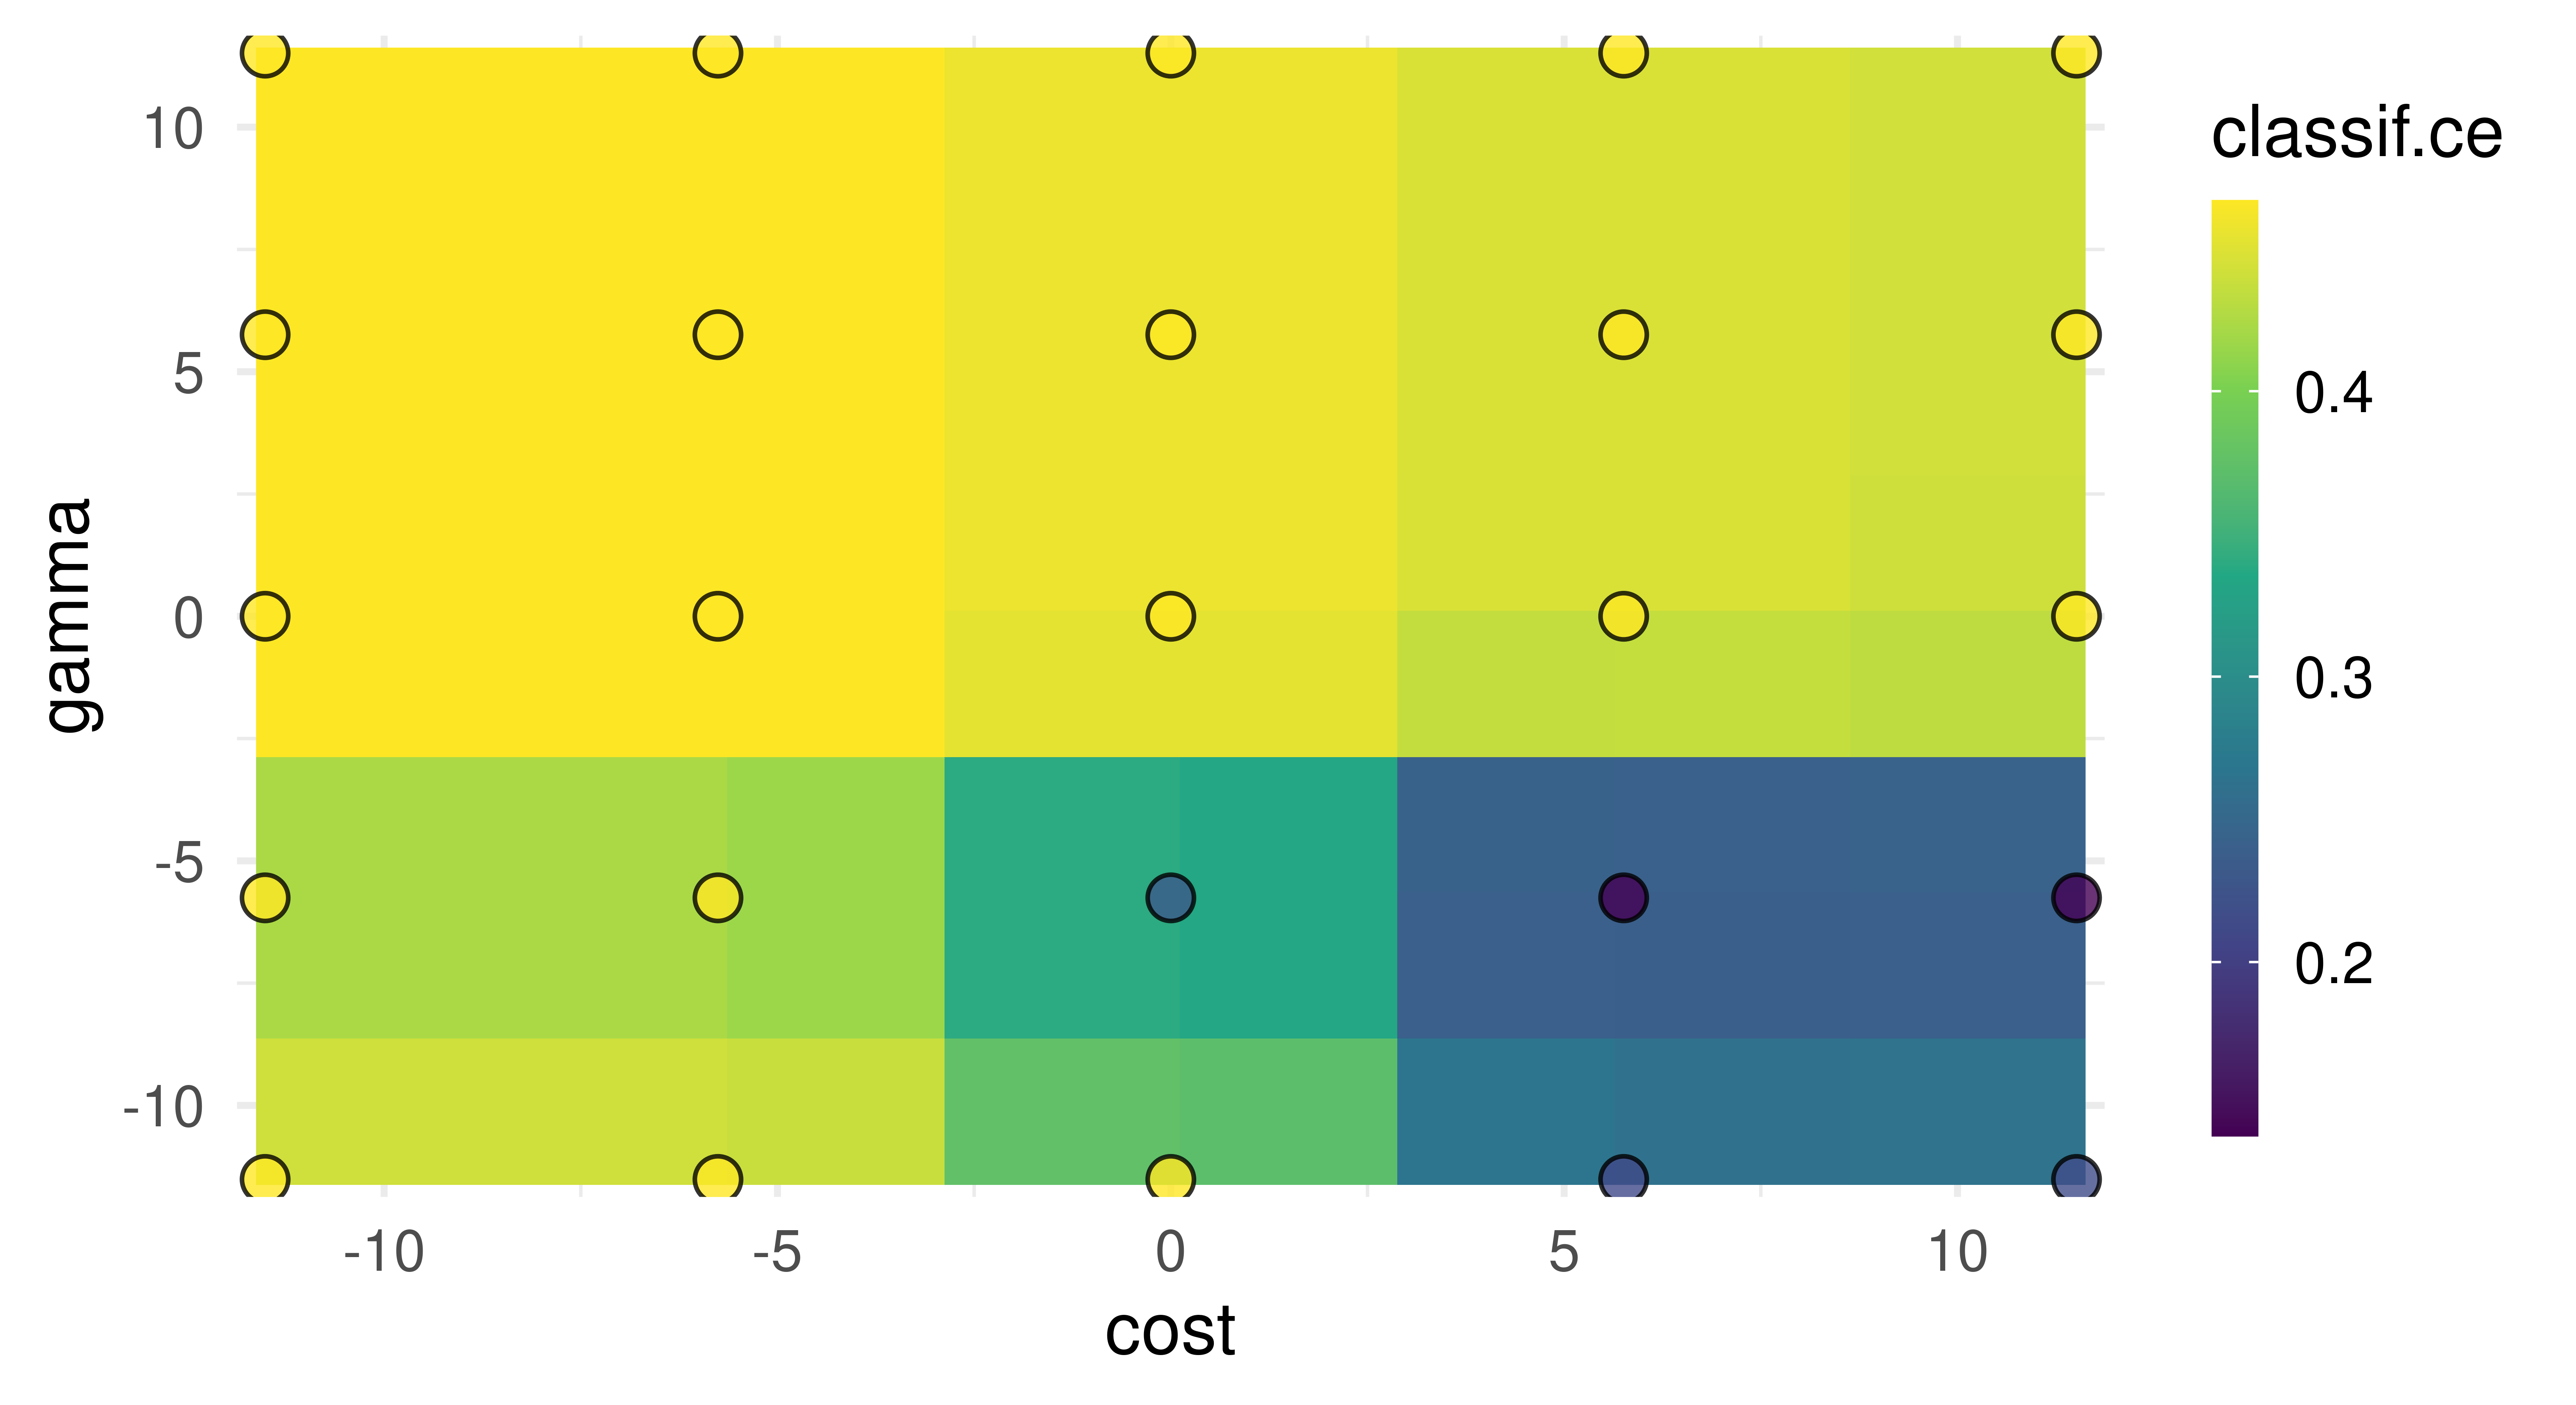 Heatmap showing model performance during HPO. y-axis is 'gamma' parameter between (-10,10) and x-axis is 'cost' parameter between (-10,10). The heatmap shows squares covering all points on the plot and circular points indicating configurations tried in our optimization. The top-left quadrant is all yellow indicating poor performance when gamma is high and cost is low. The bottom-right is dark blue indicating good performance when cost is high and gamma is low.